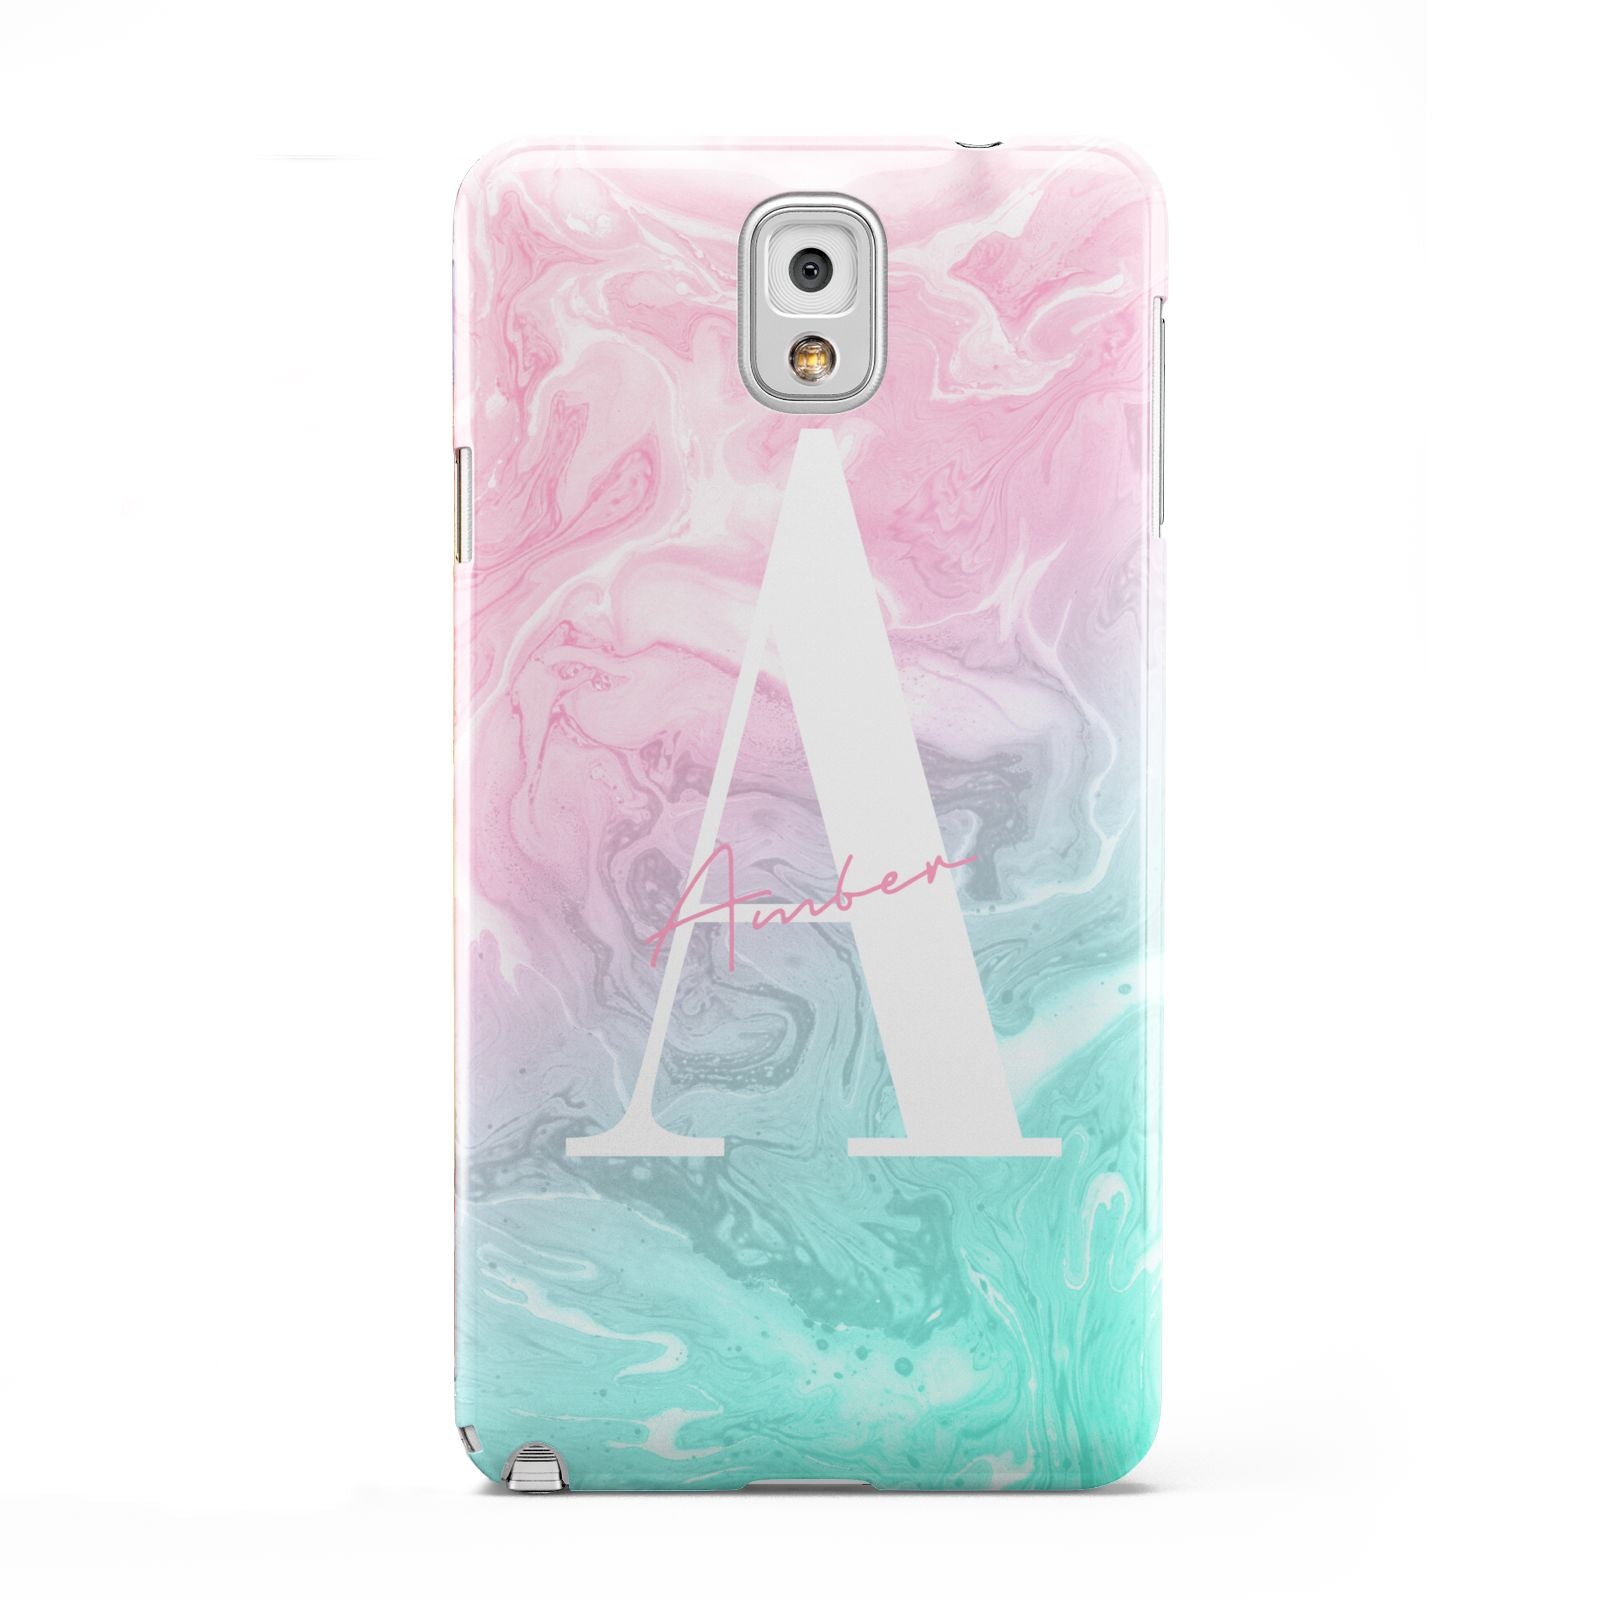 Monogrammed Pink Turquoise Pastel Marble Samsung Galaxy Note 3 Case